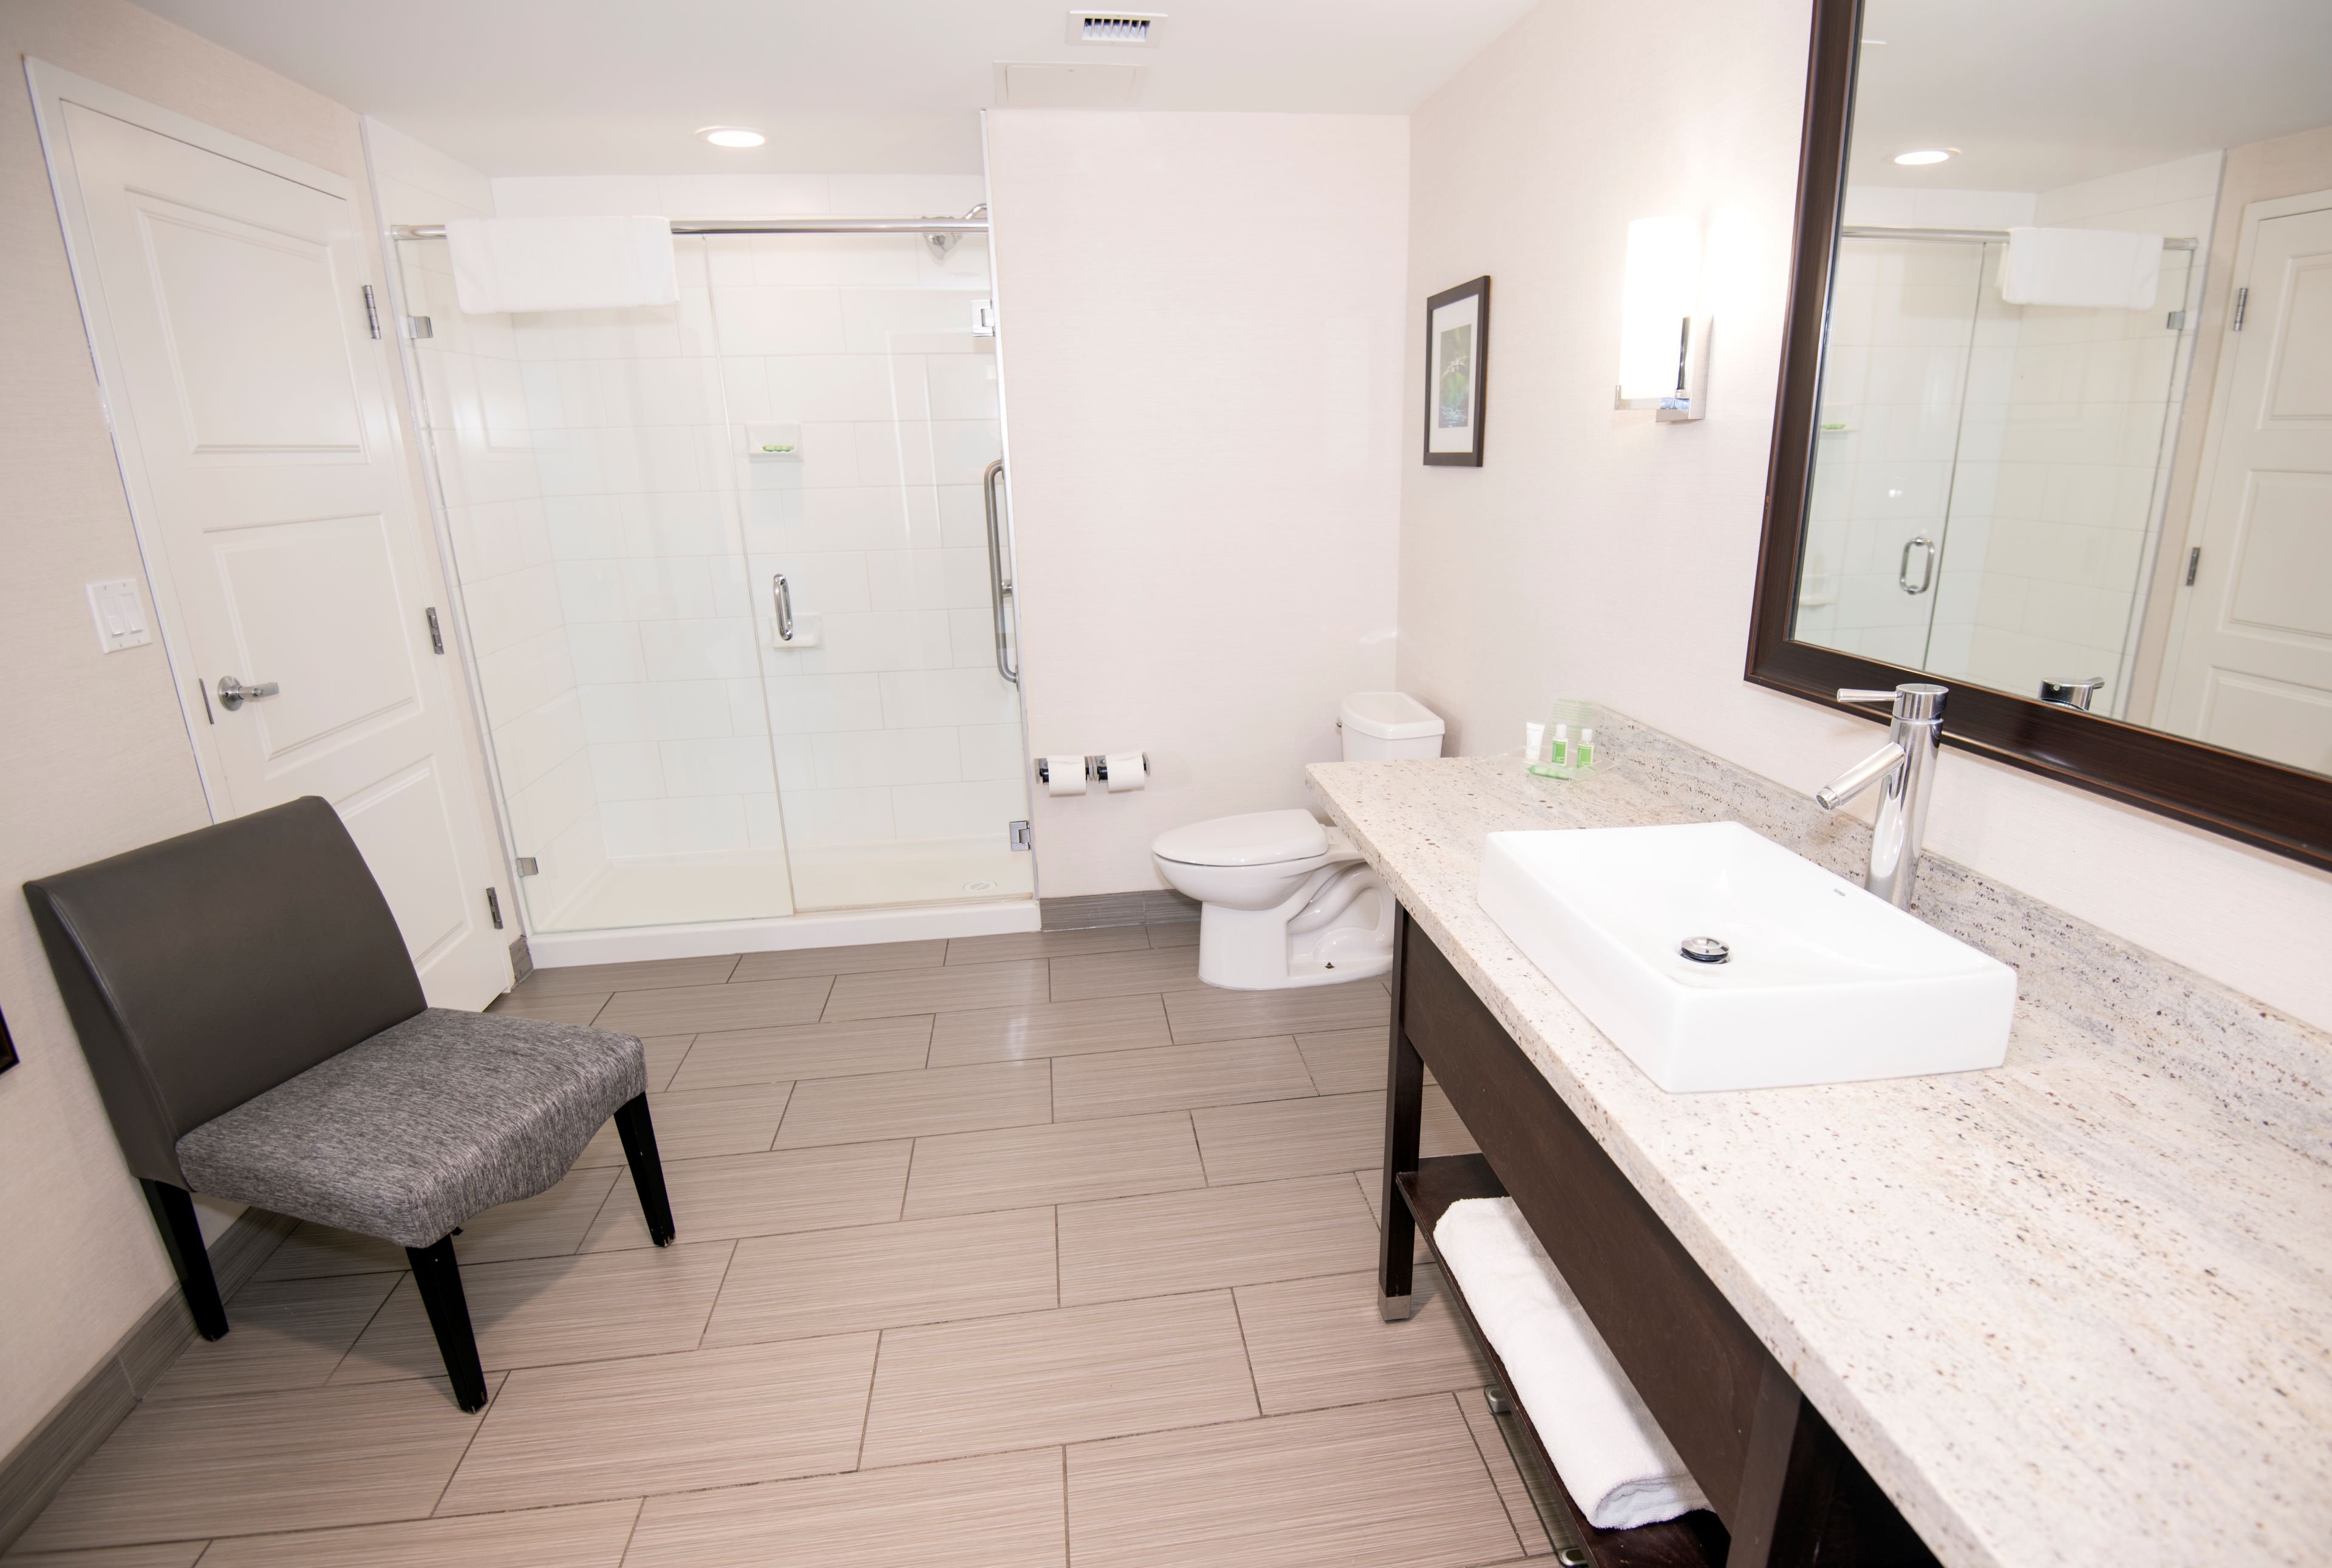 Reenergized with a refreshing shower in our spacious bathroom